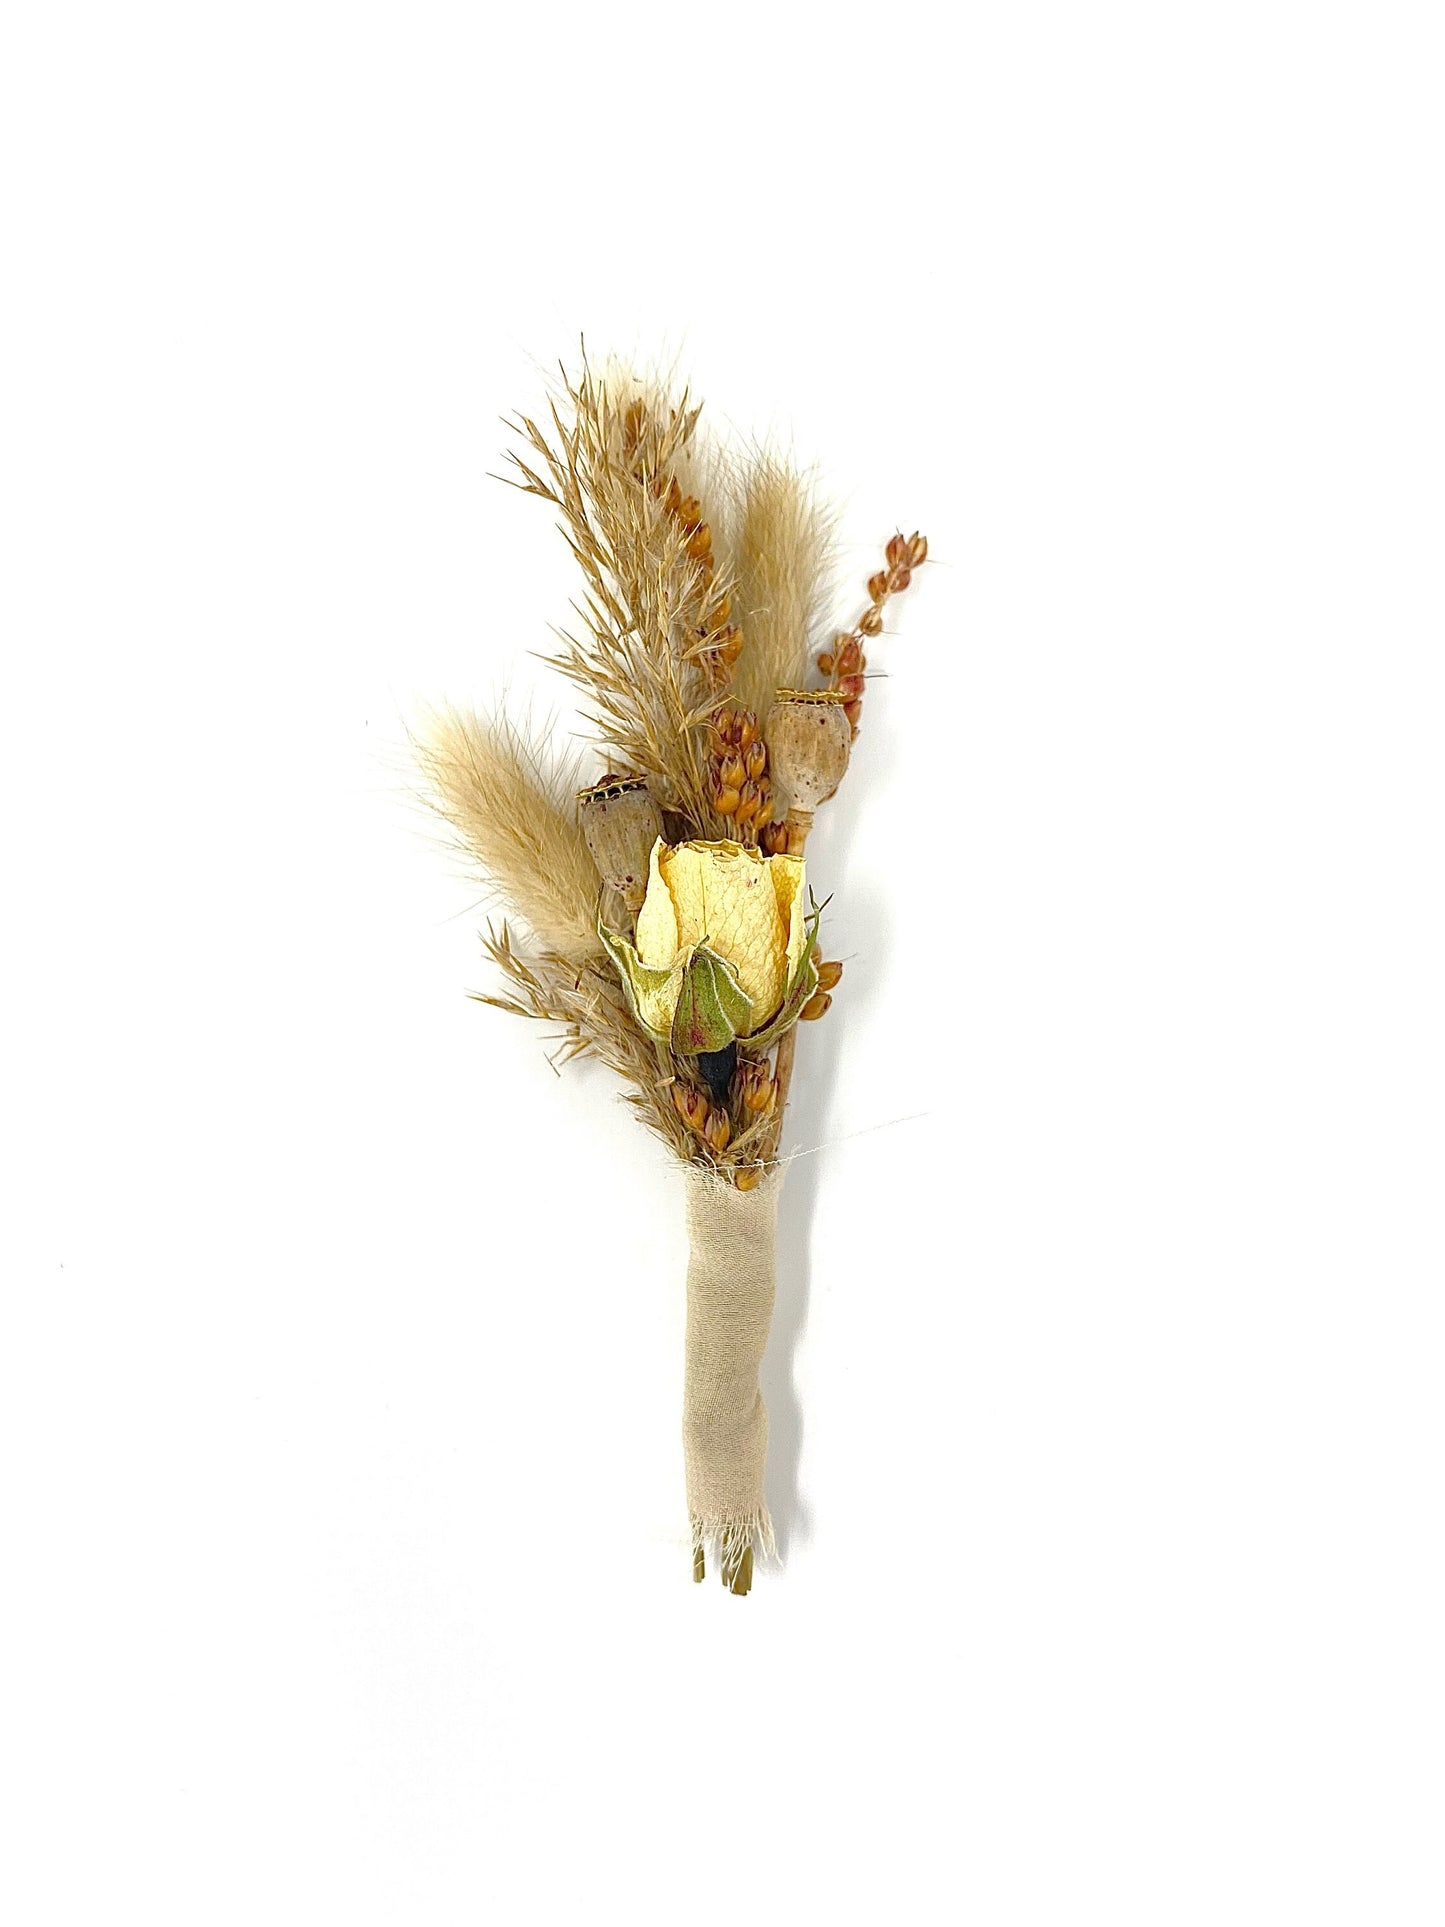 Wedding Boutonniere, Roses, Dried Flowers, Preserved Floral, Prom, Bunny Tails, Wedding, Accessory, Beige and White, Bridal, Groomsman